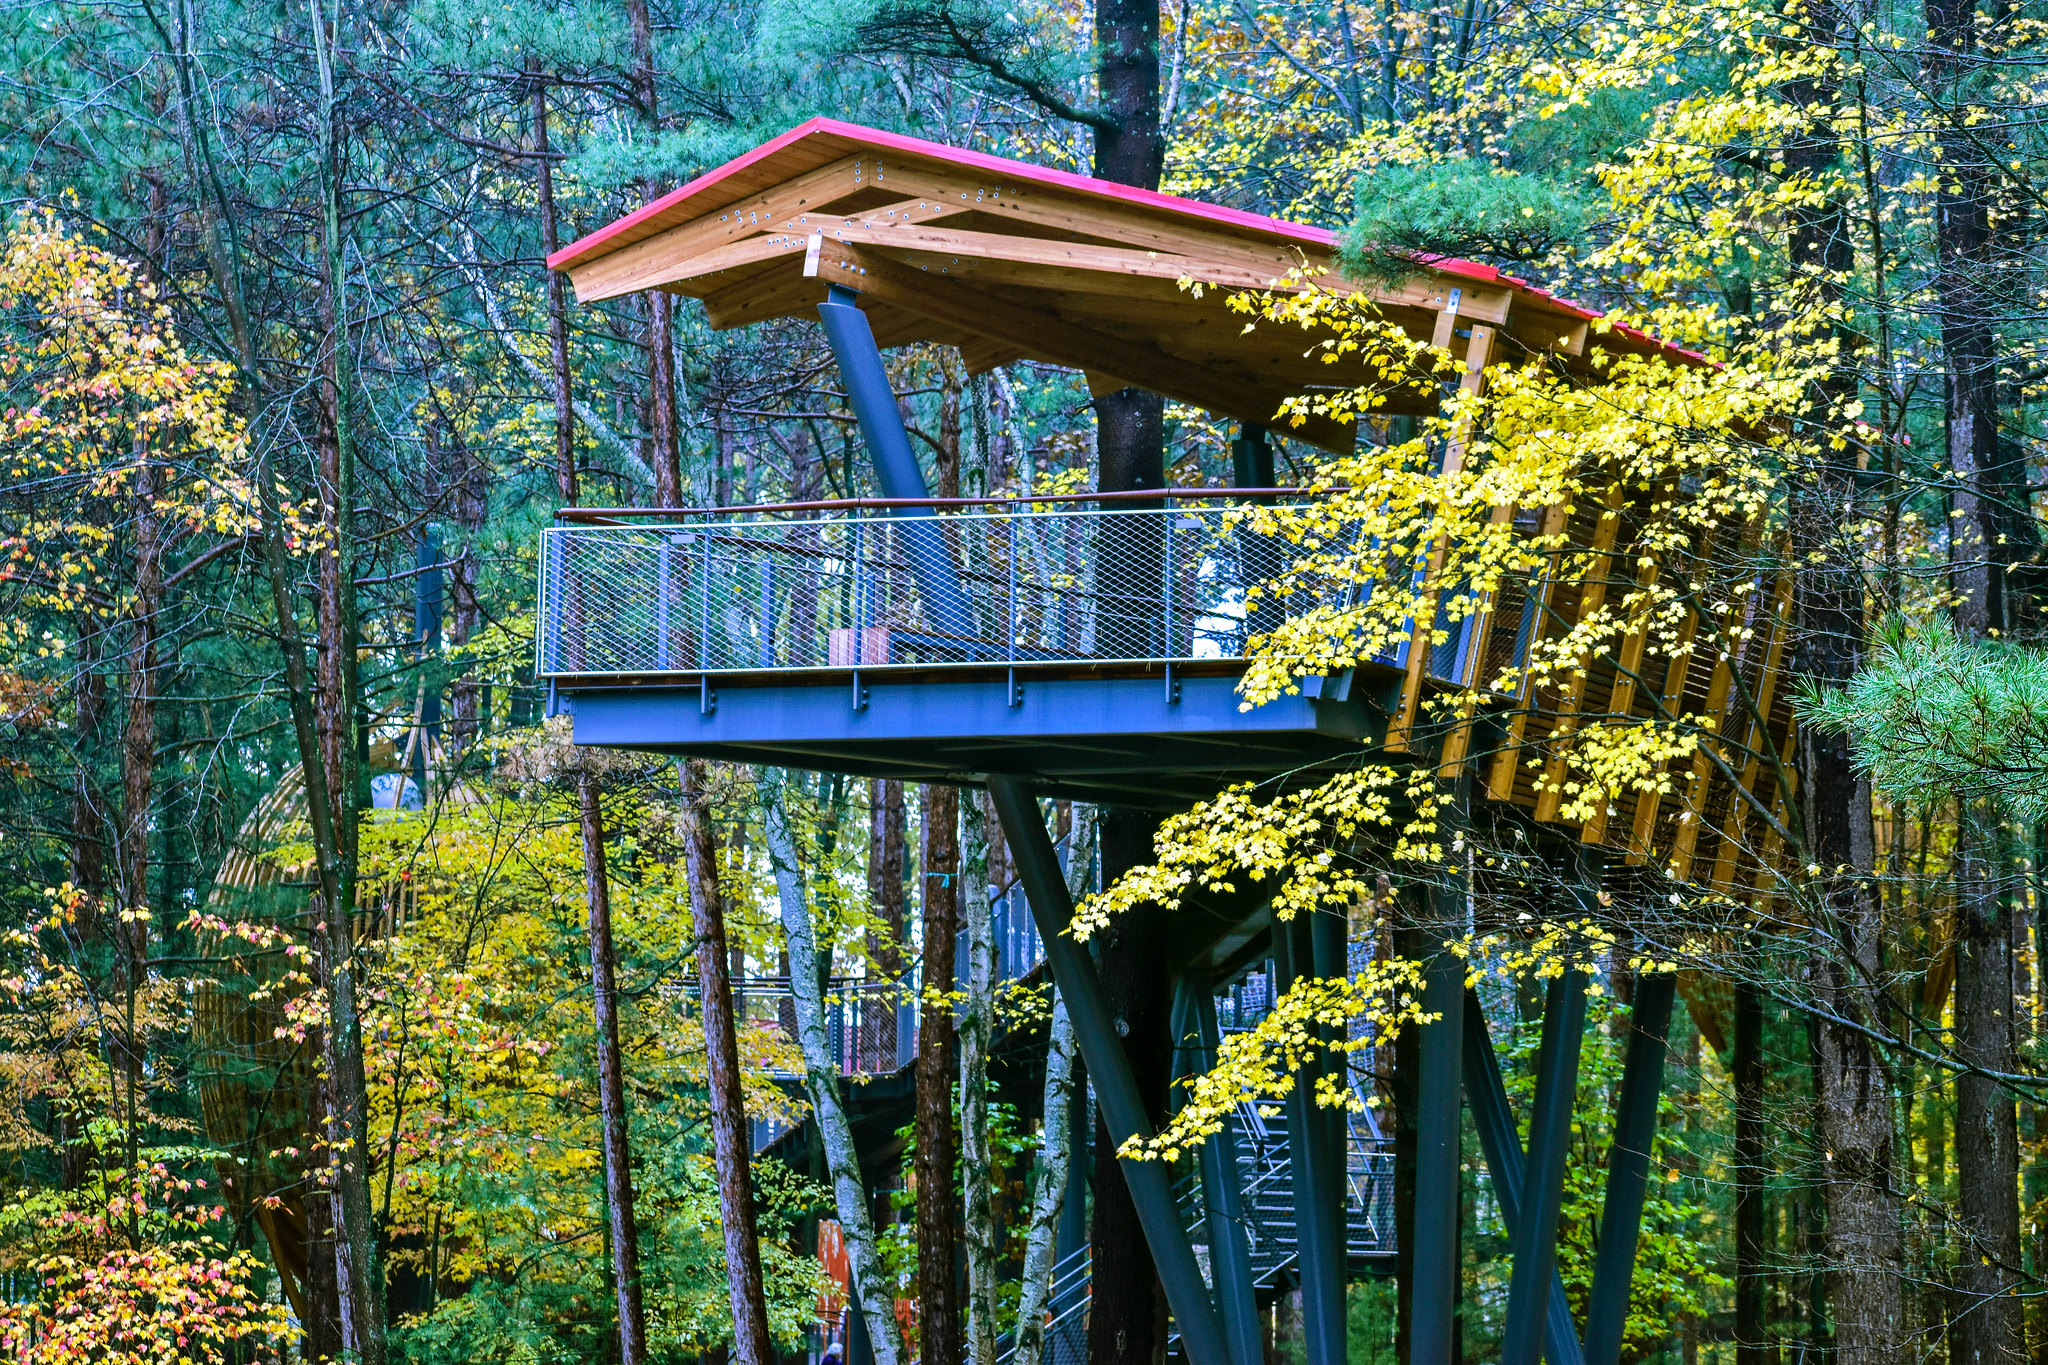 Whiting Forest of Dow Gardens Canopy Walk, An Adco Detailing Project, winner of the 2020 SDS2 Solid Steel Awards in Commercial, Small tonnage. Photo courtesy of Dow Gardens.